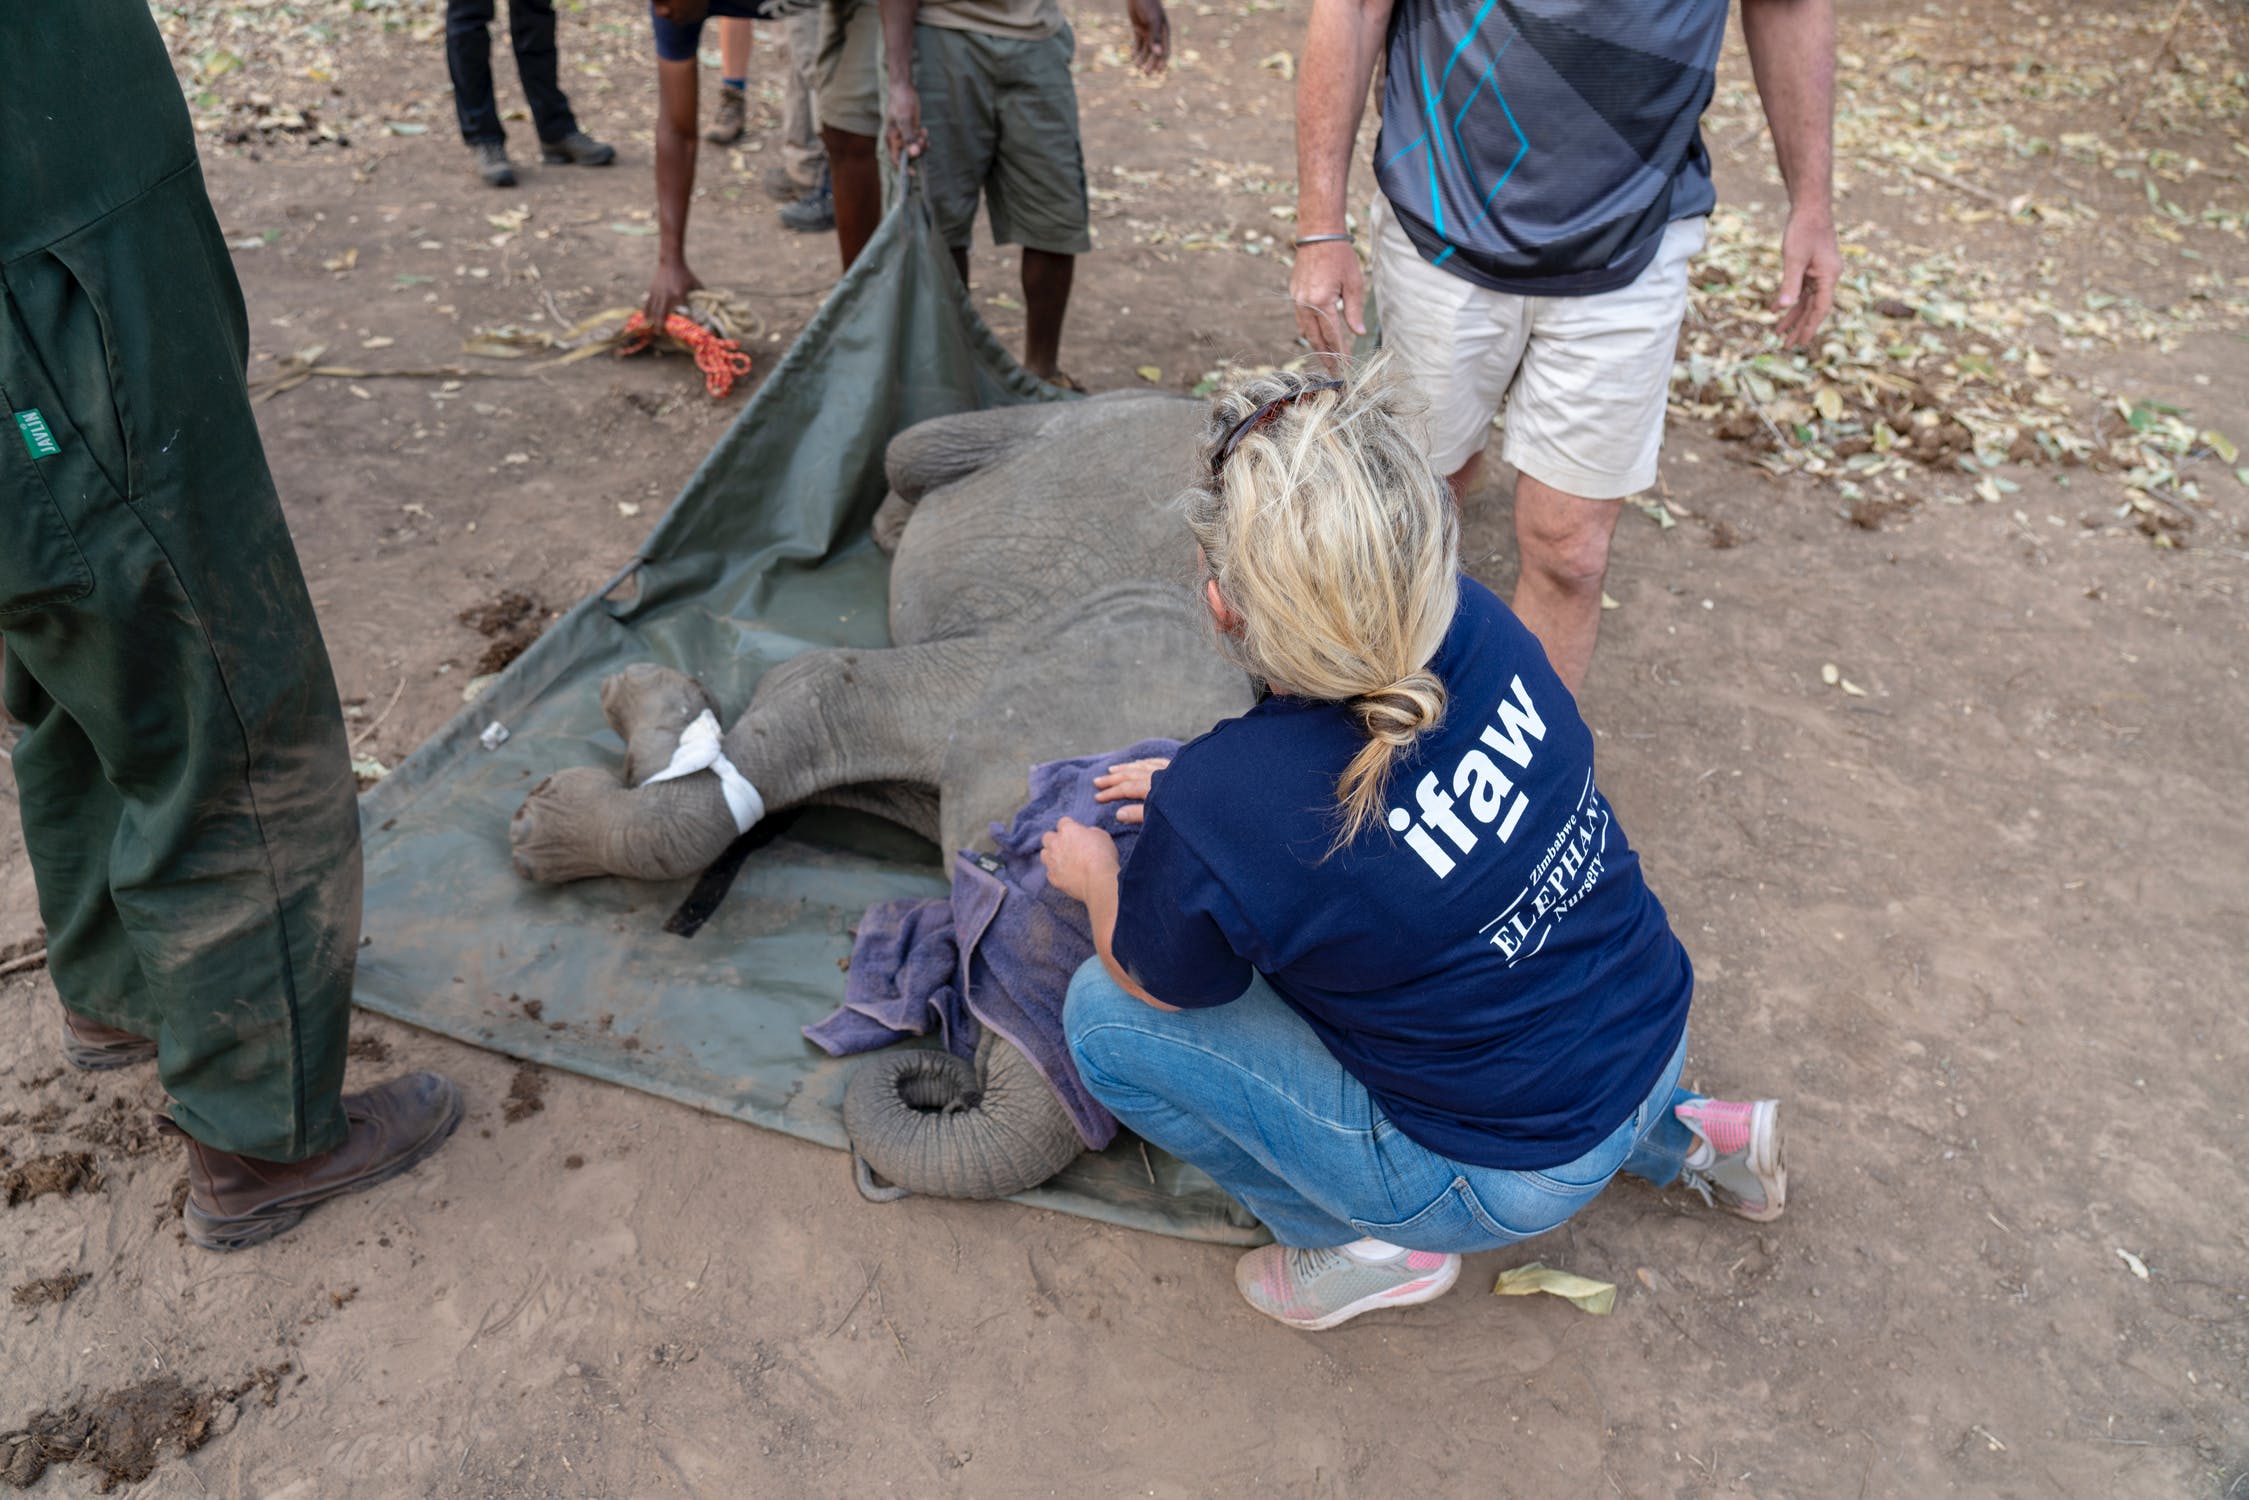 Since 1969, IFAW has provided hands-on assistance to and protection of animals in need, and global leadership on pressing issues impacting their health, well-being and survival.